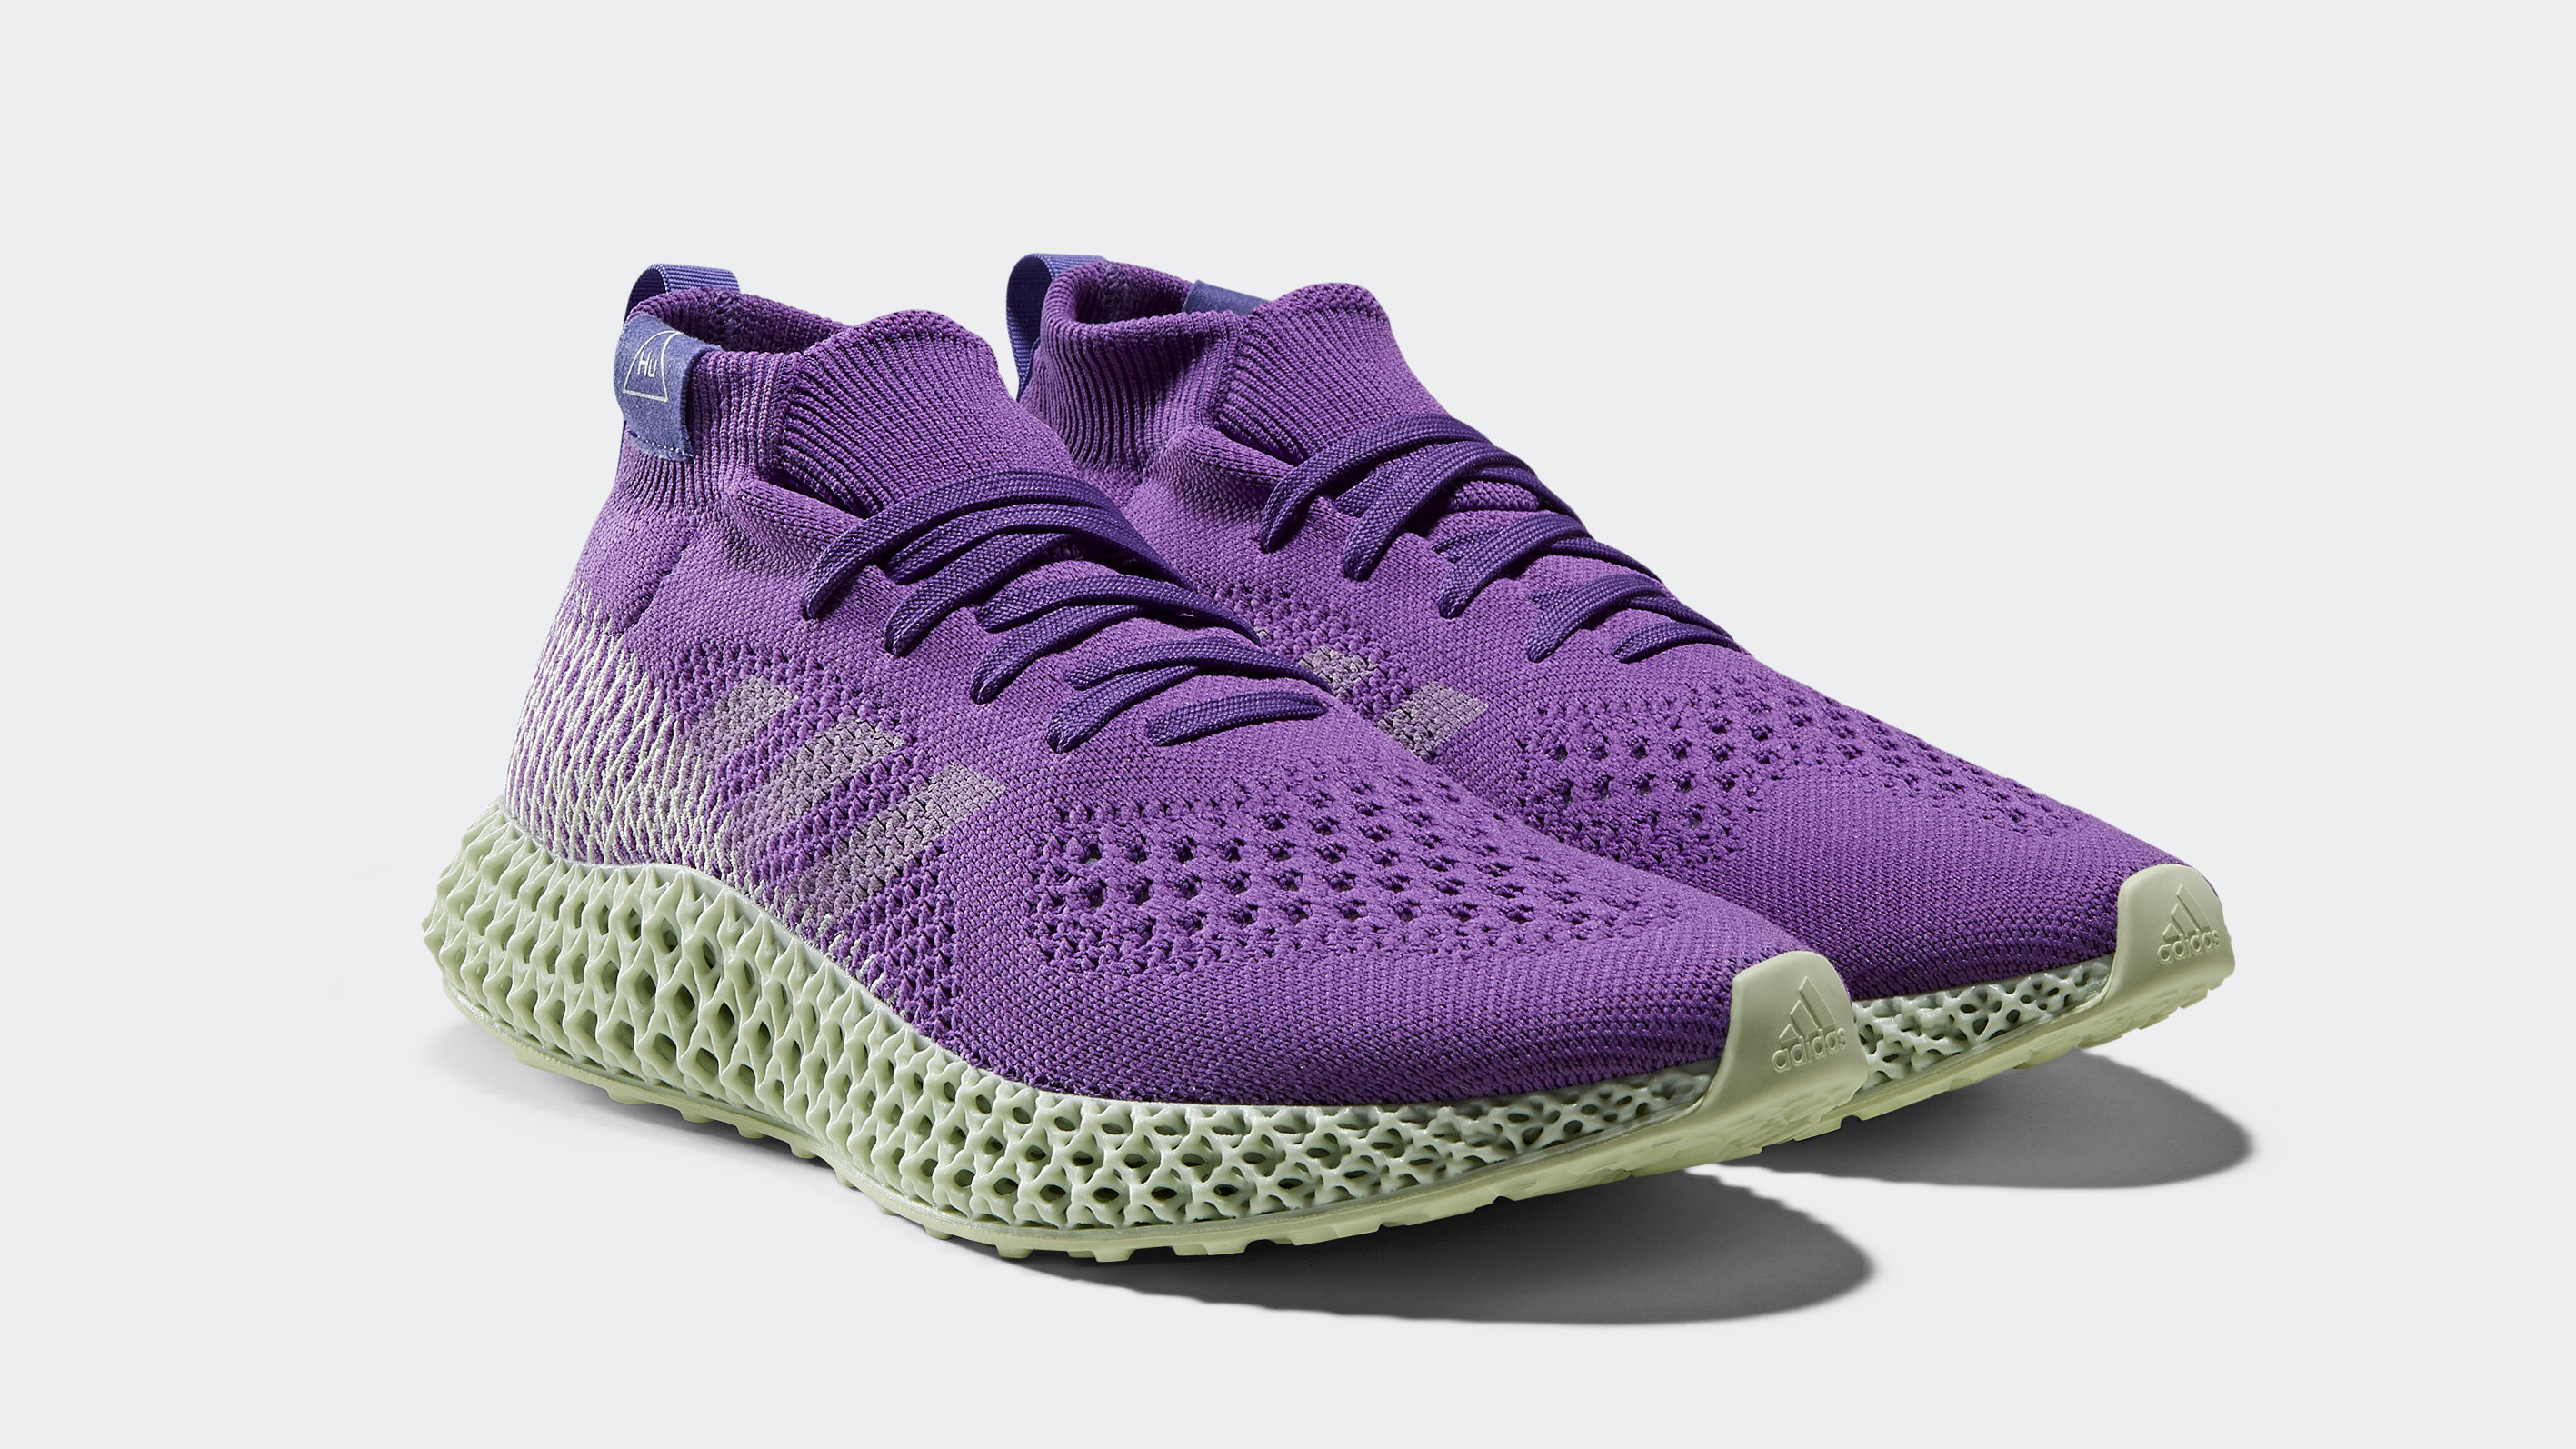 Pharrell x Adidas 4D Runner Mid 'Active Purple' 'Tech Olive' Release Date |  Sole Collector